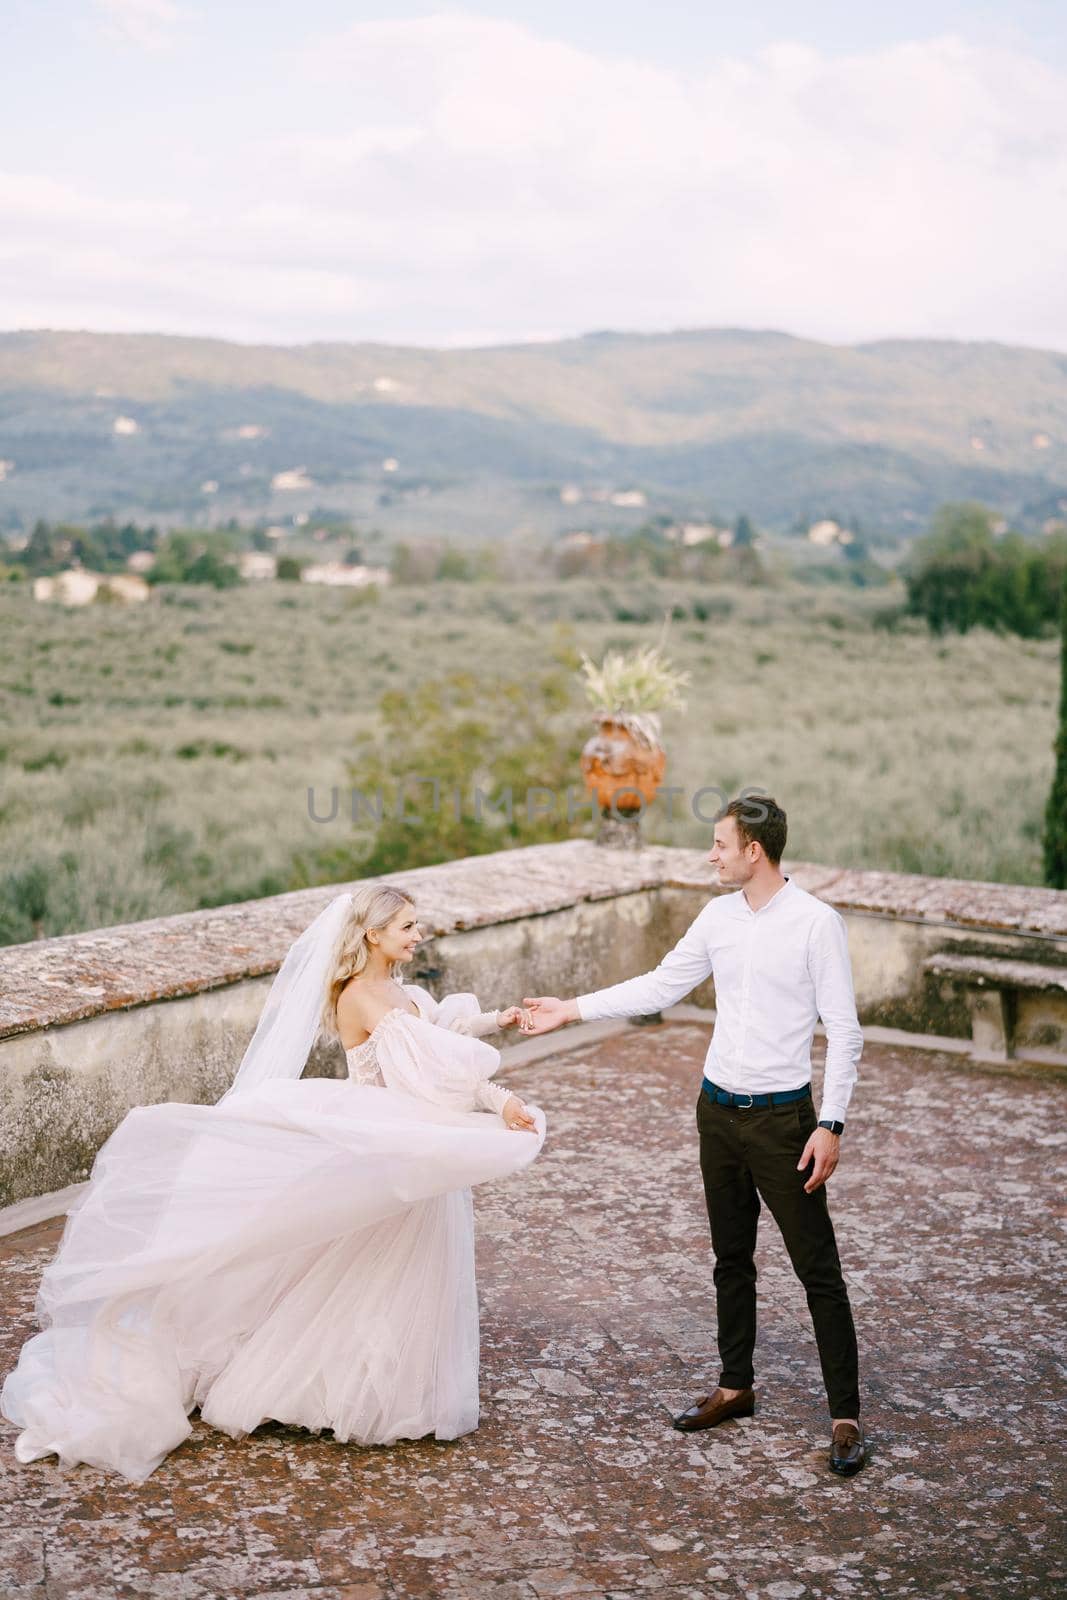 Wedding at an old winery villa in Tuscany, Italy. The bride and groom are dancing on the roof of the villa. by Nadtochiy